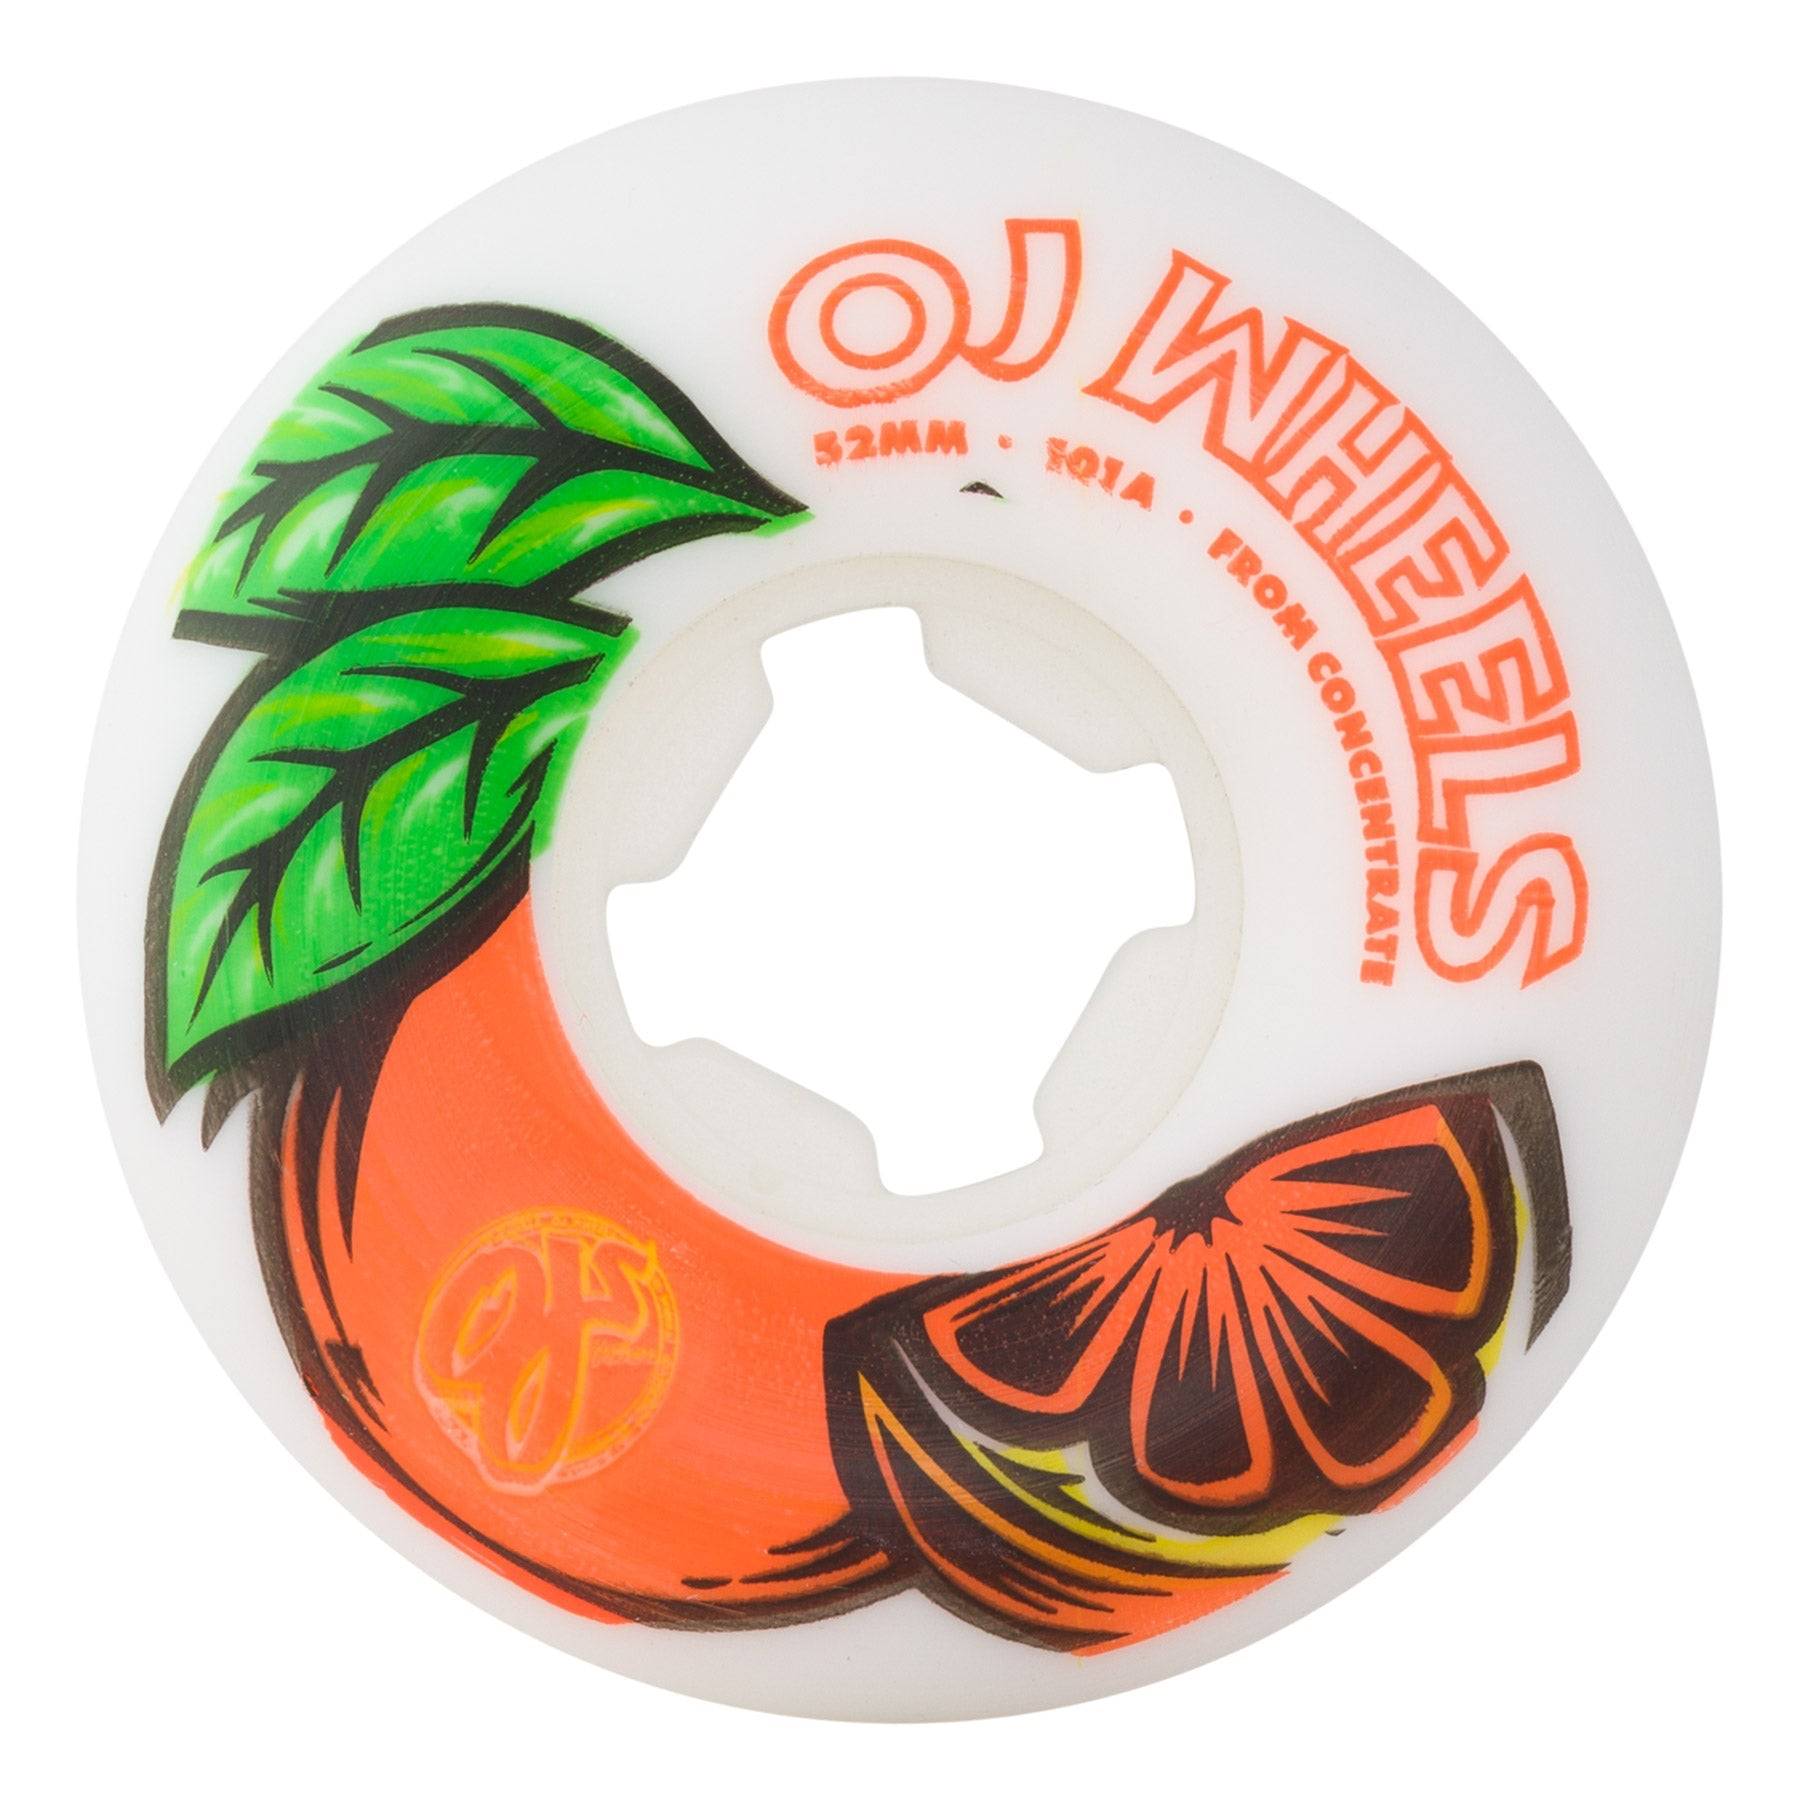 OJ Wheels 52mm From Concentrate Hardline Sunny Smith LLC